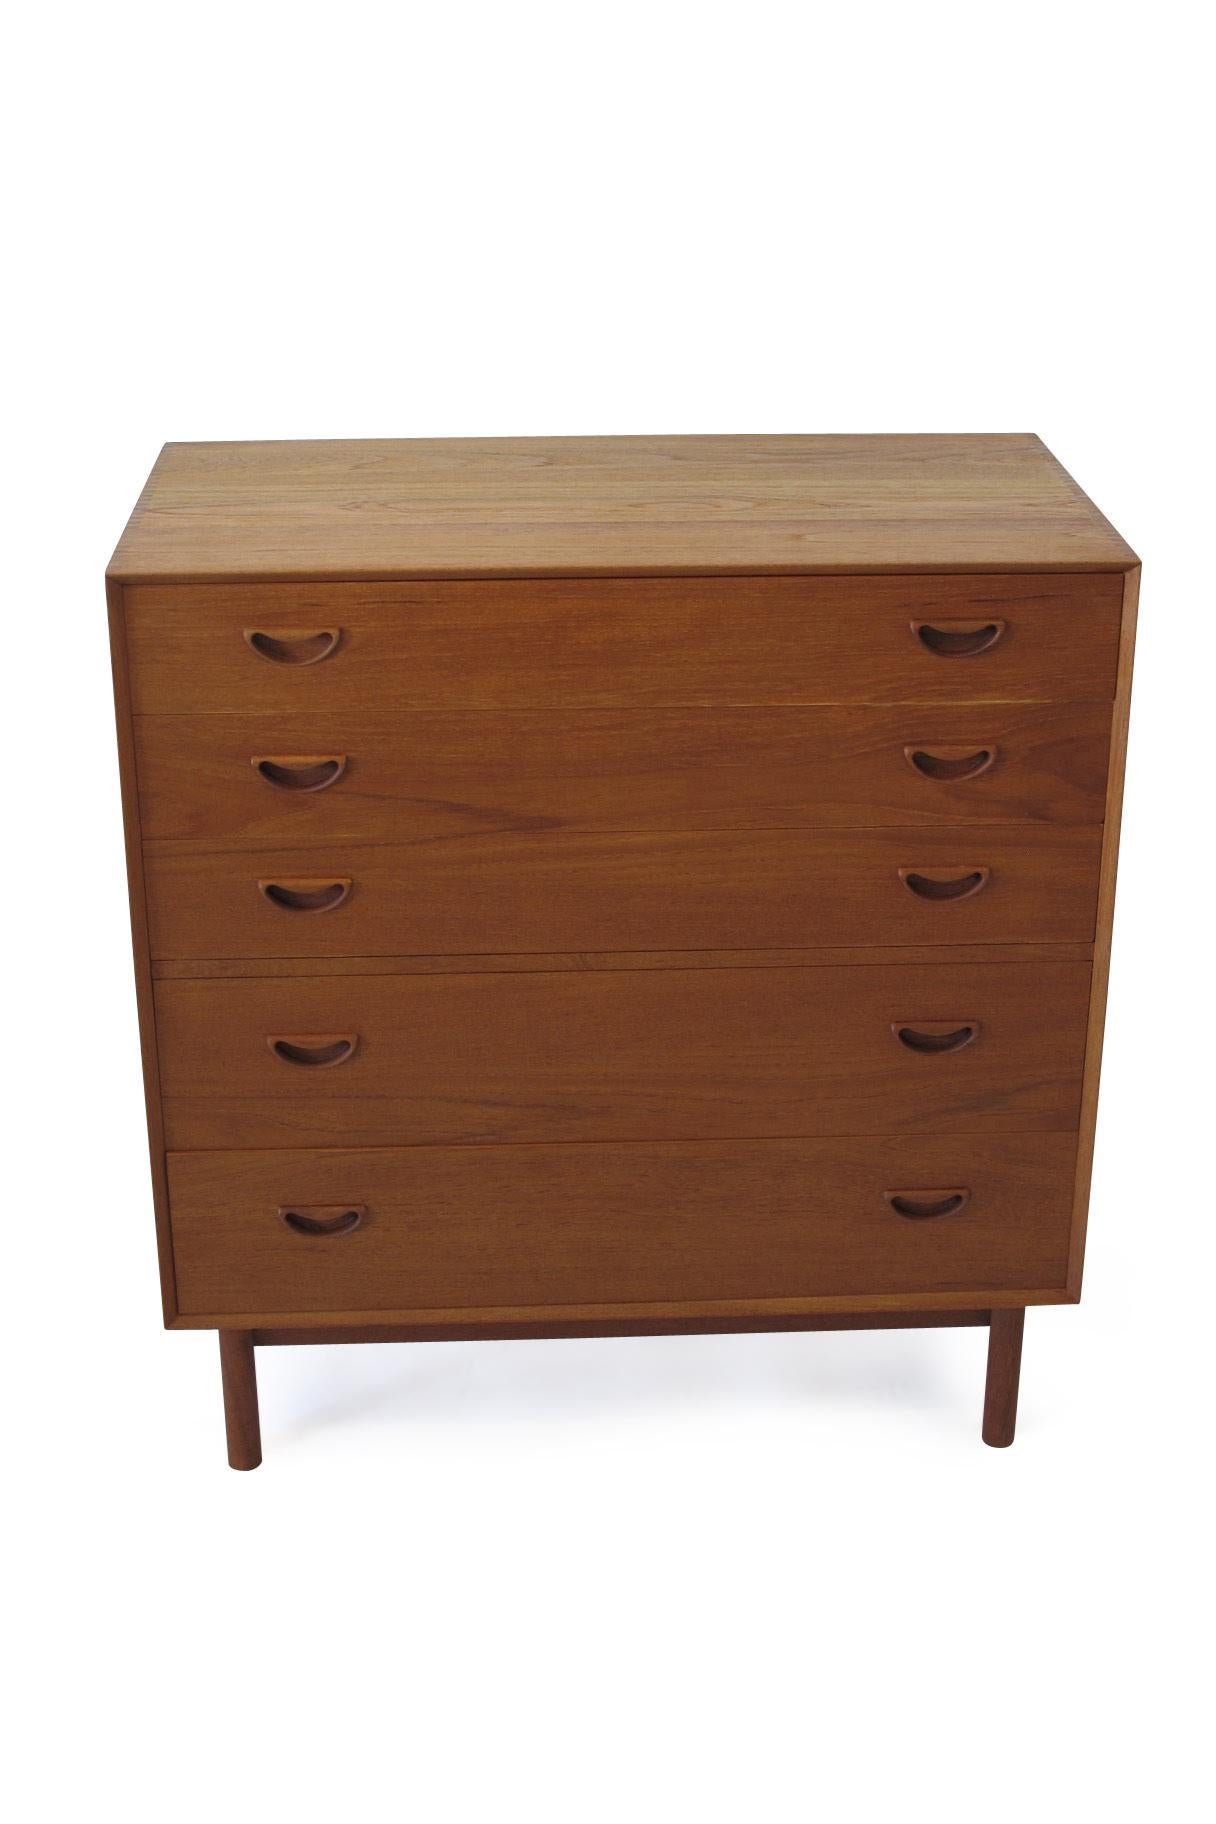 Midcentury six-drawer dresser designed by Peter Hvidt & Orla Molgaard Nielsen Model 301, Denmark. Crafted of solid teak with exposed joinery and sculptural pulls, raised on teak legs. Professionally restored and in excellent condition.